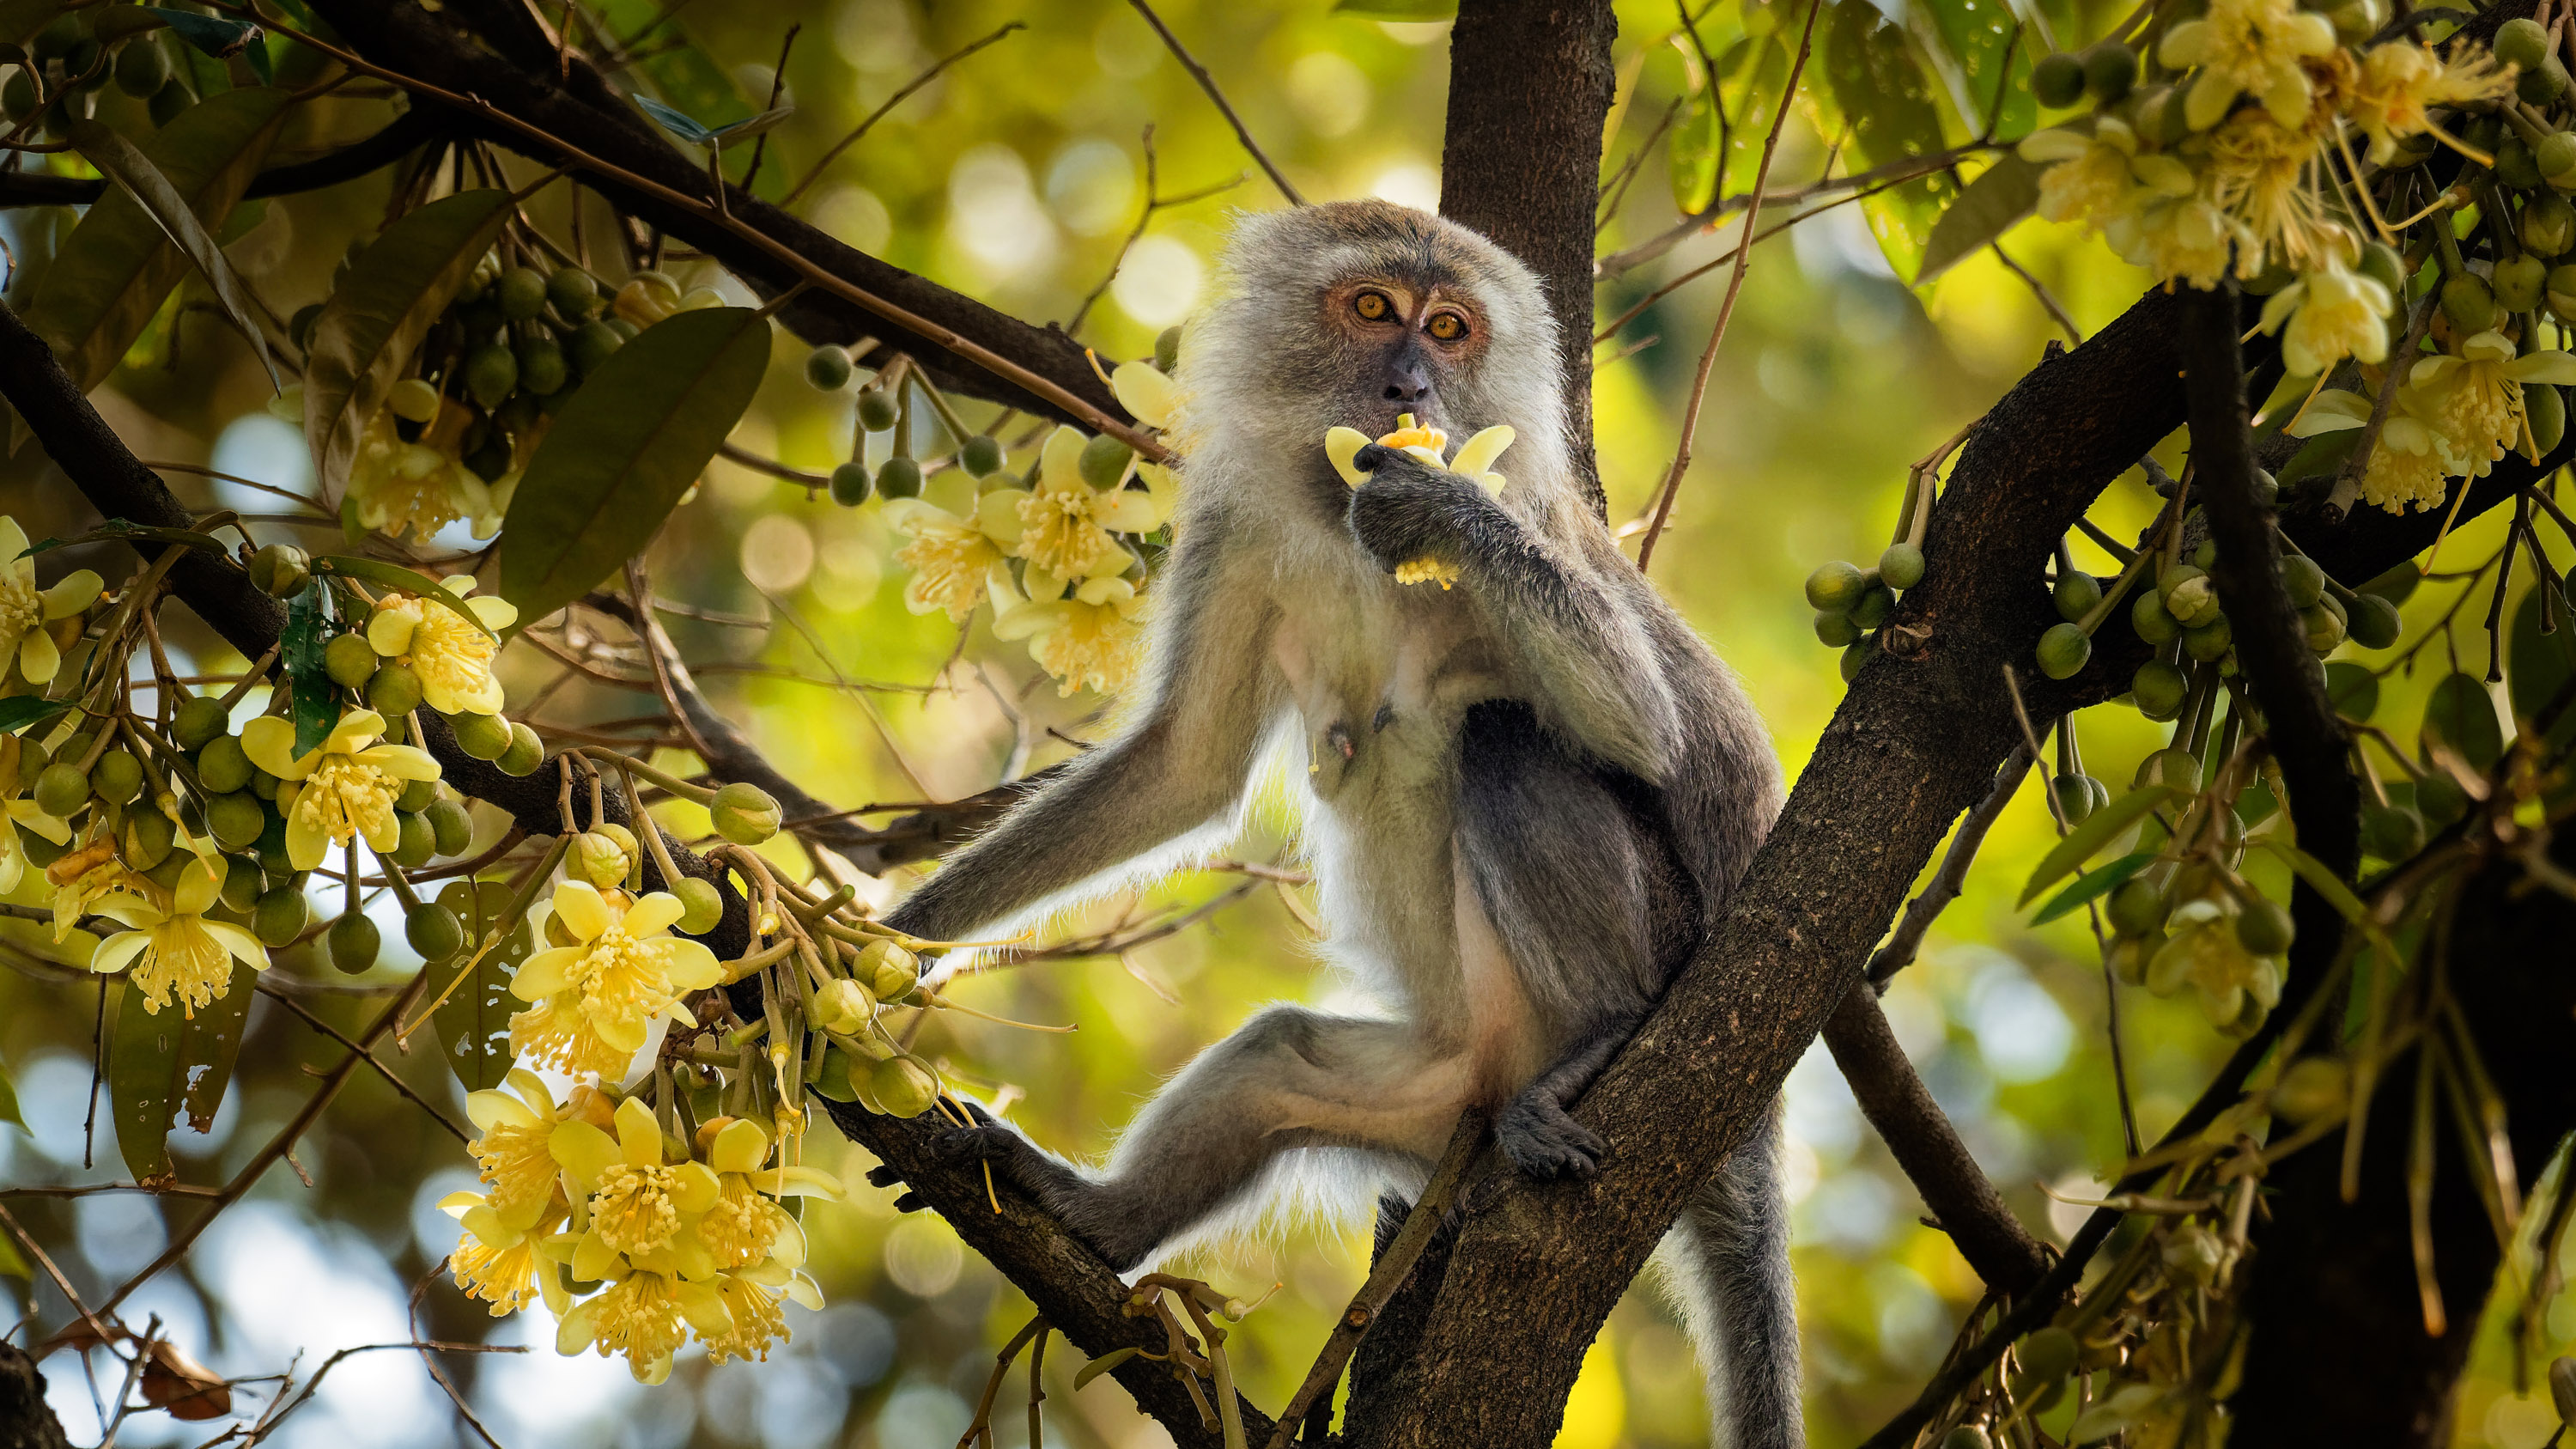 A cynomolgus monkey in a tree holding a flower to its mouth